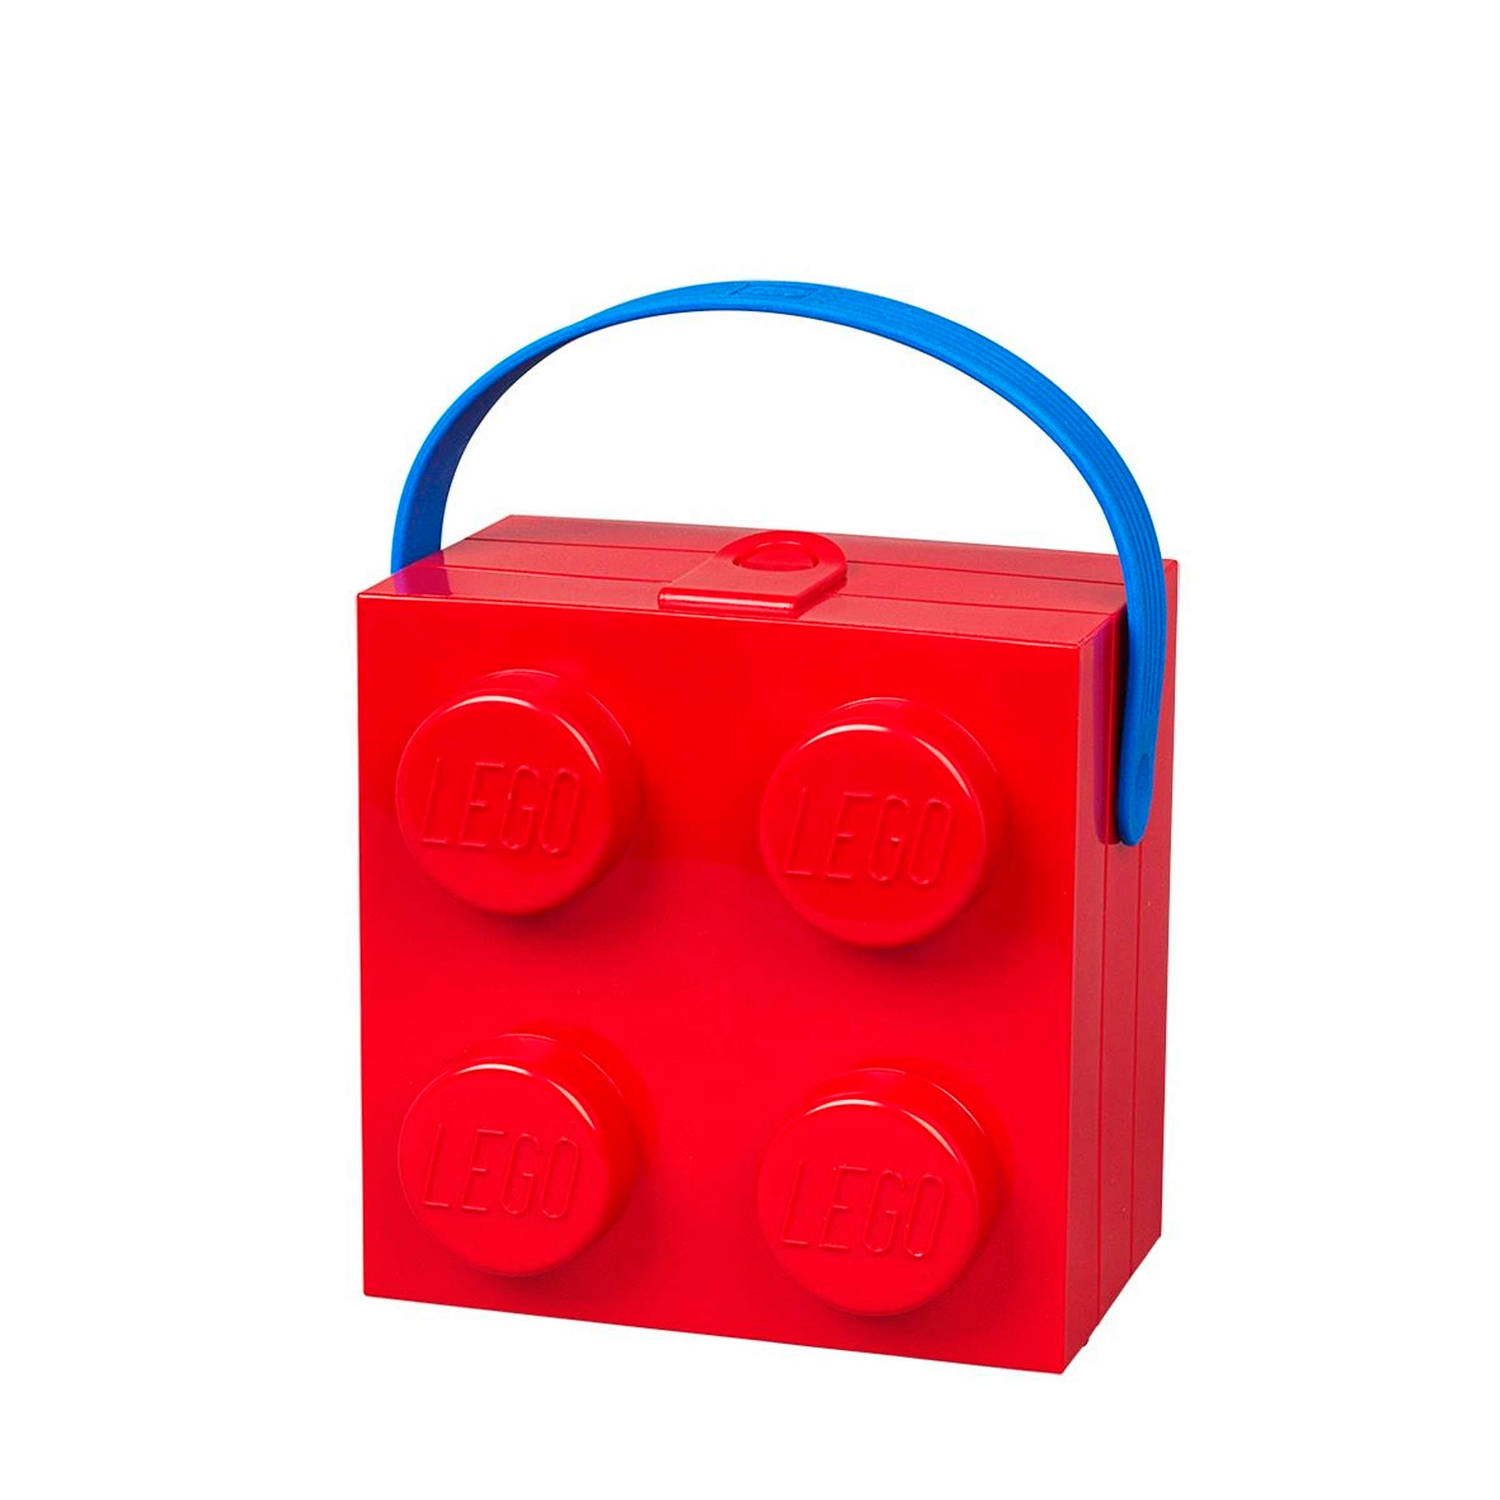 Lunchkoffer Lego: Rood